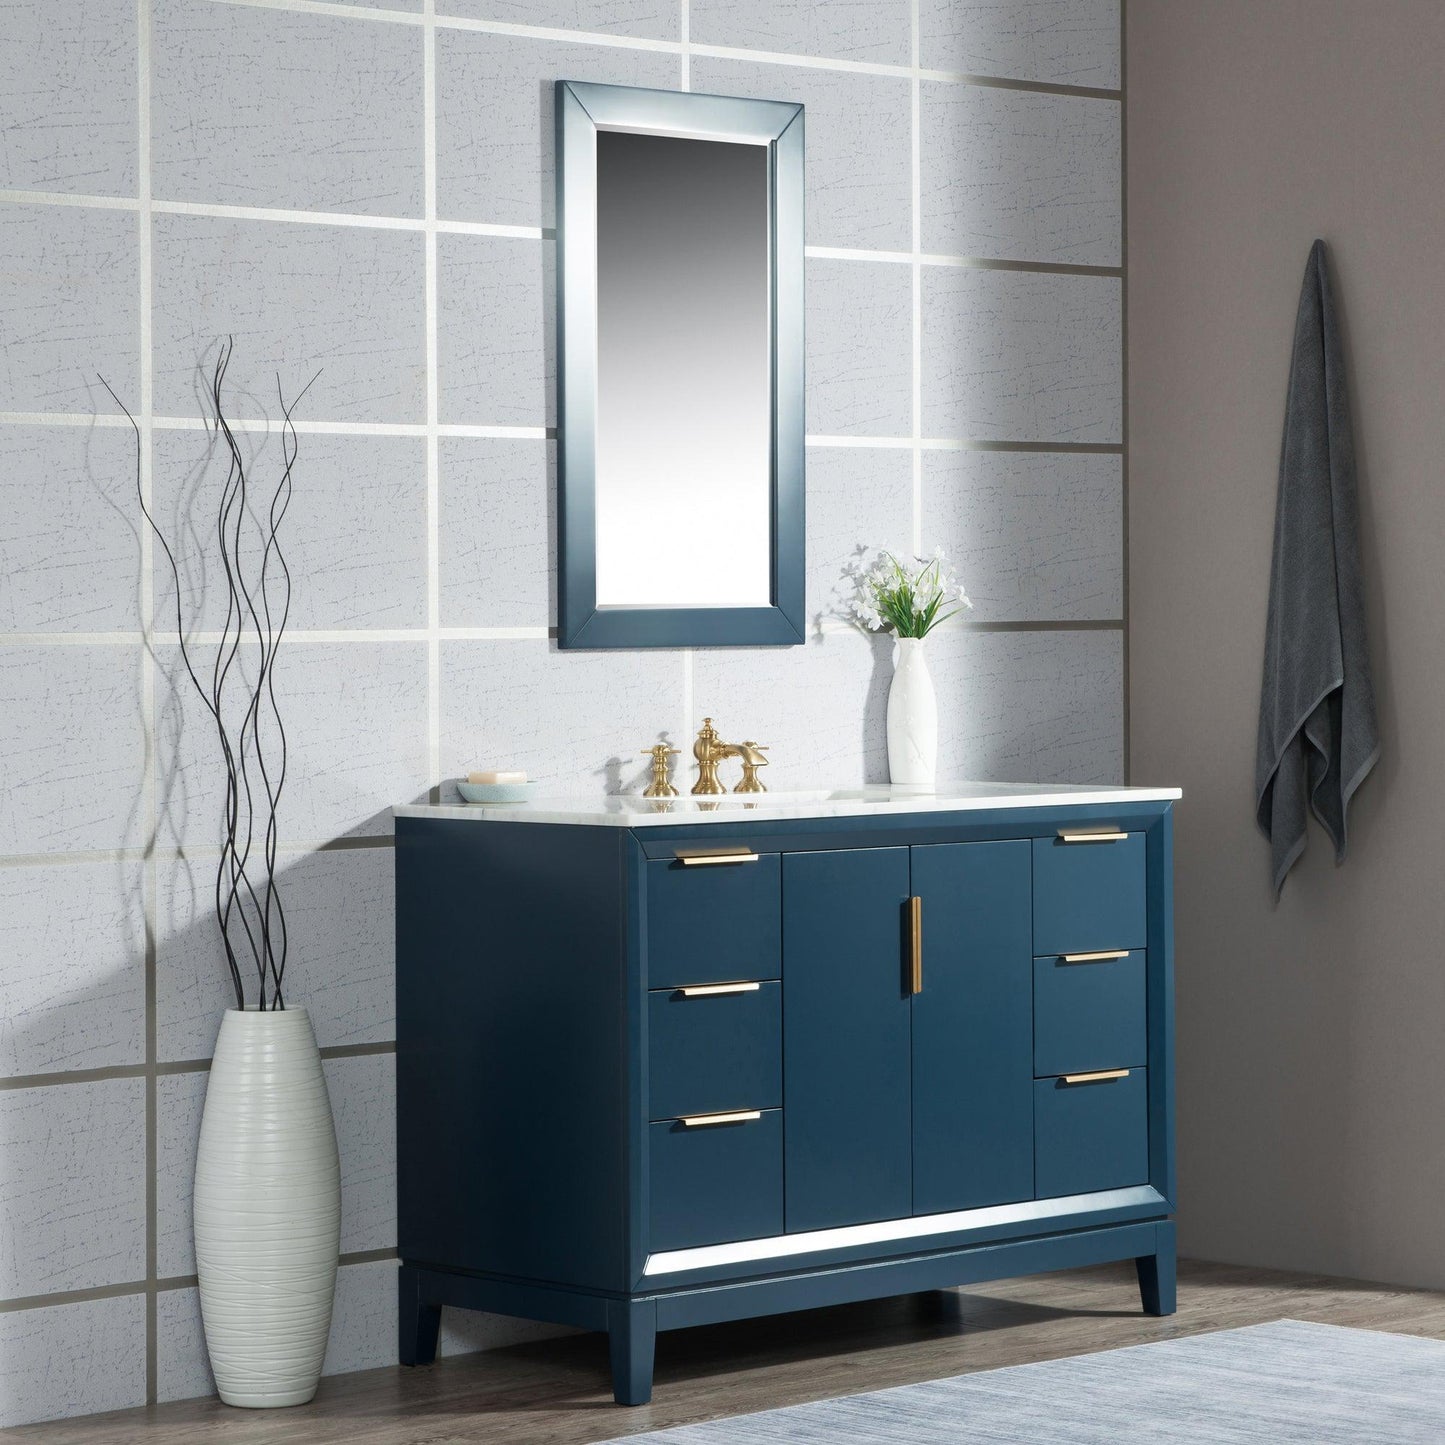 Water Creation Elizabeth 48" Single Sink Carrara White Marble Vanity In Monarch Blue With Matching Mirror and F2-0013-06-FX Lavatory Faucet